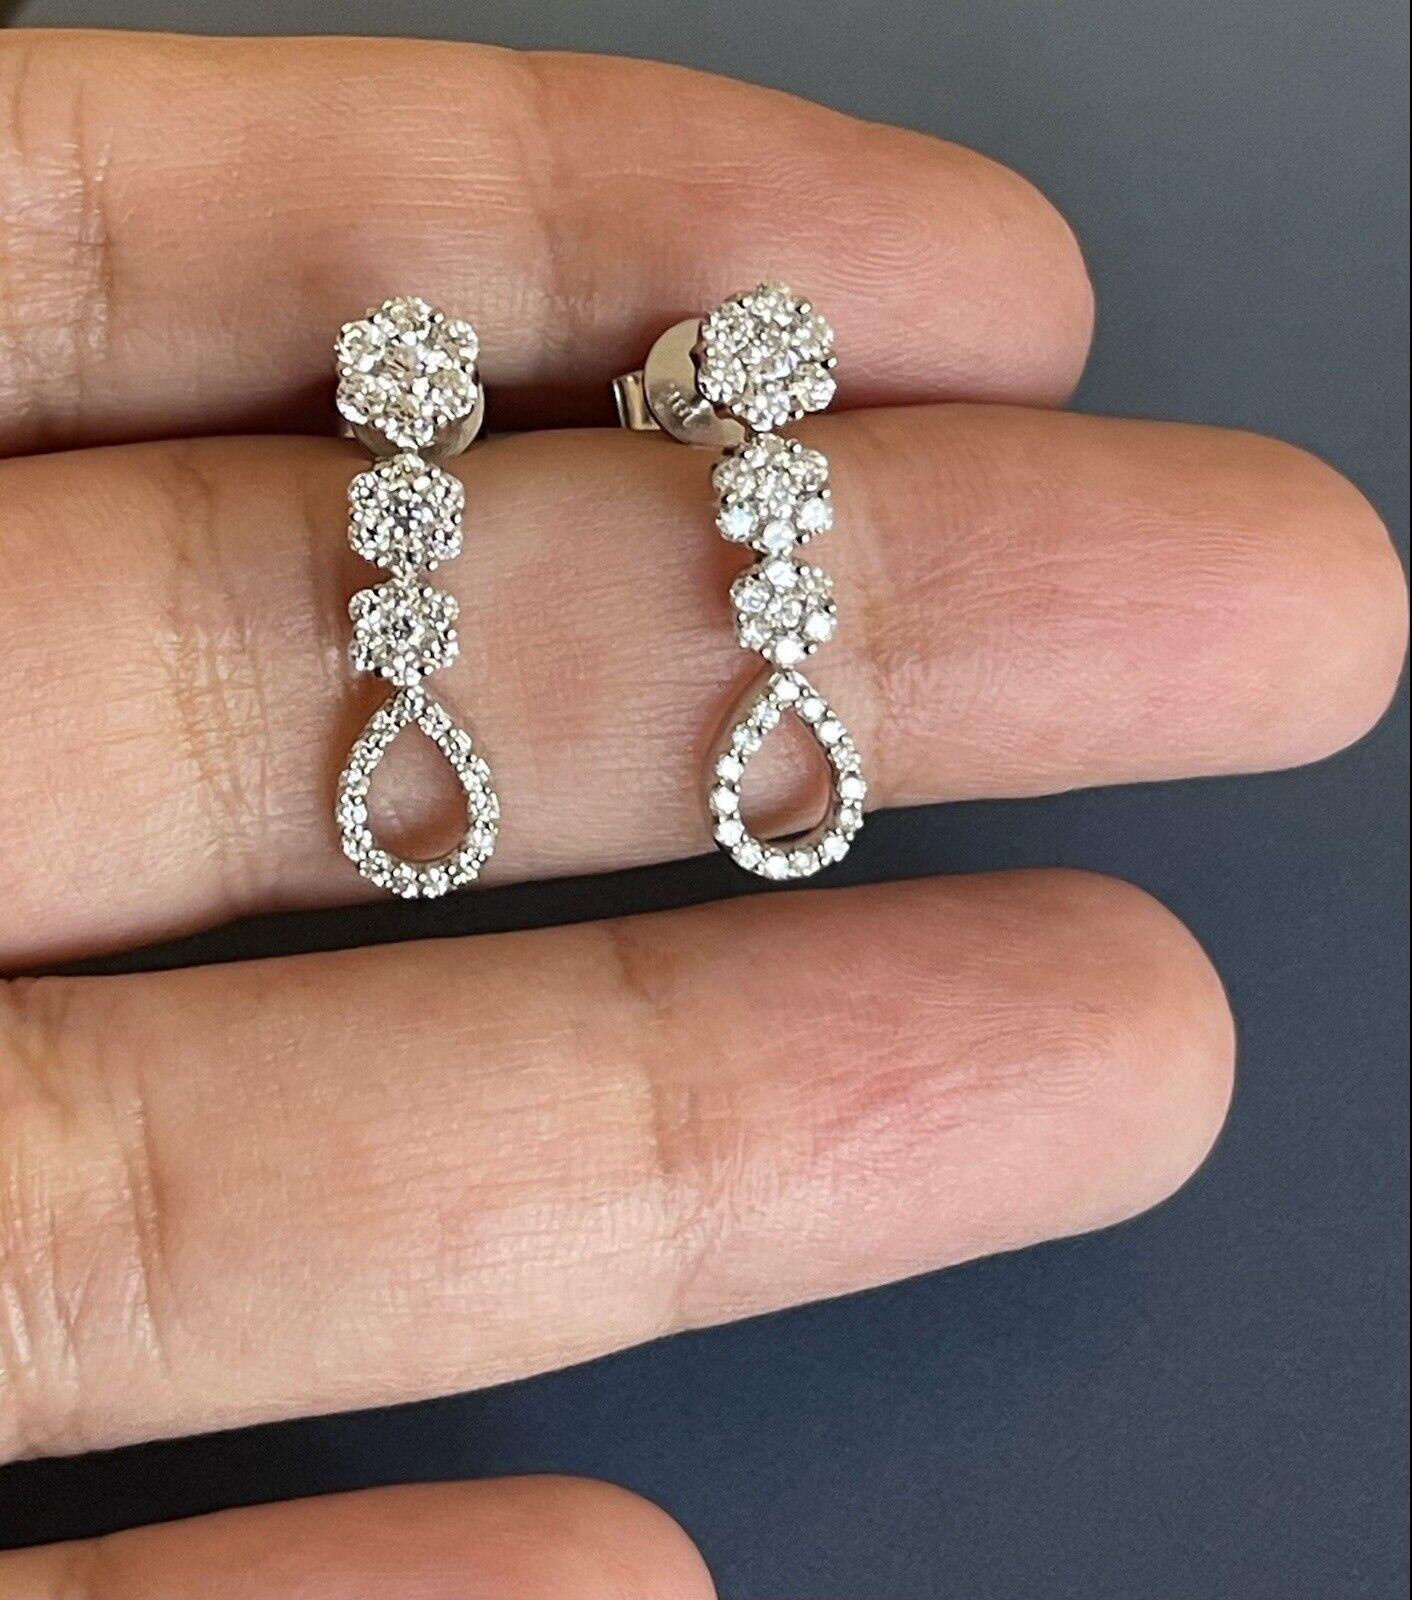 18ct White Gold Diamond Earrings 1.20ct Daisy Drop Cocktail Bridal One Carat For Sale 2